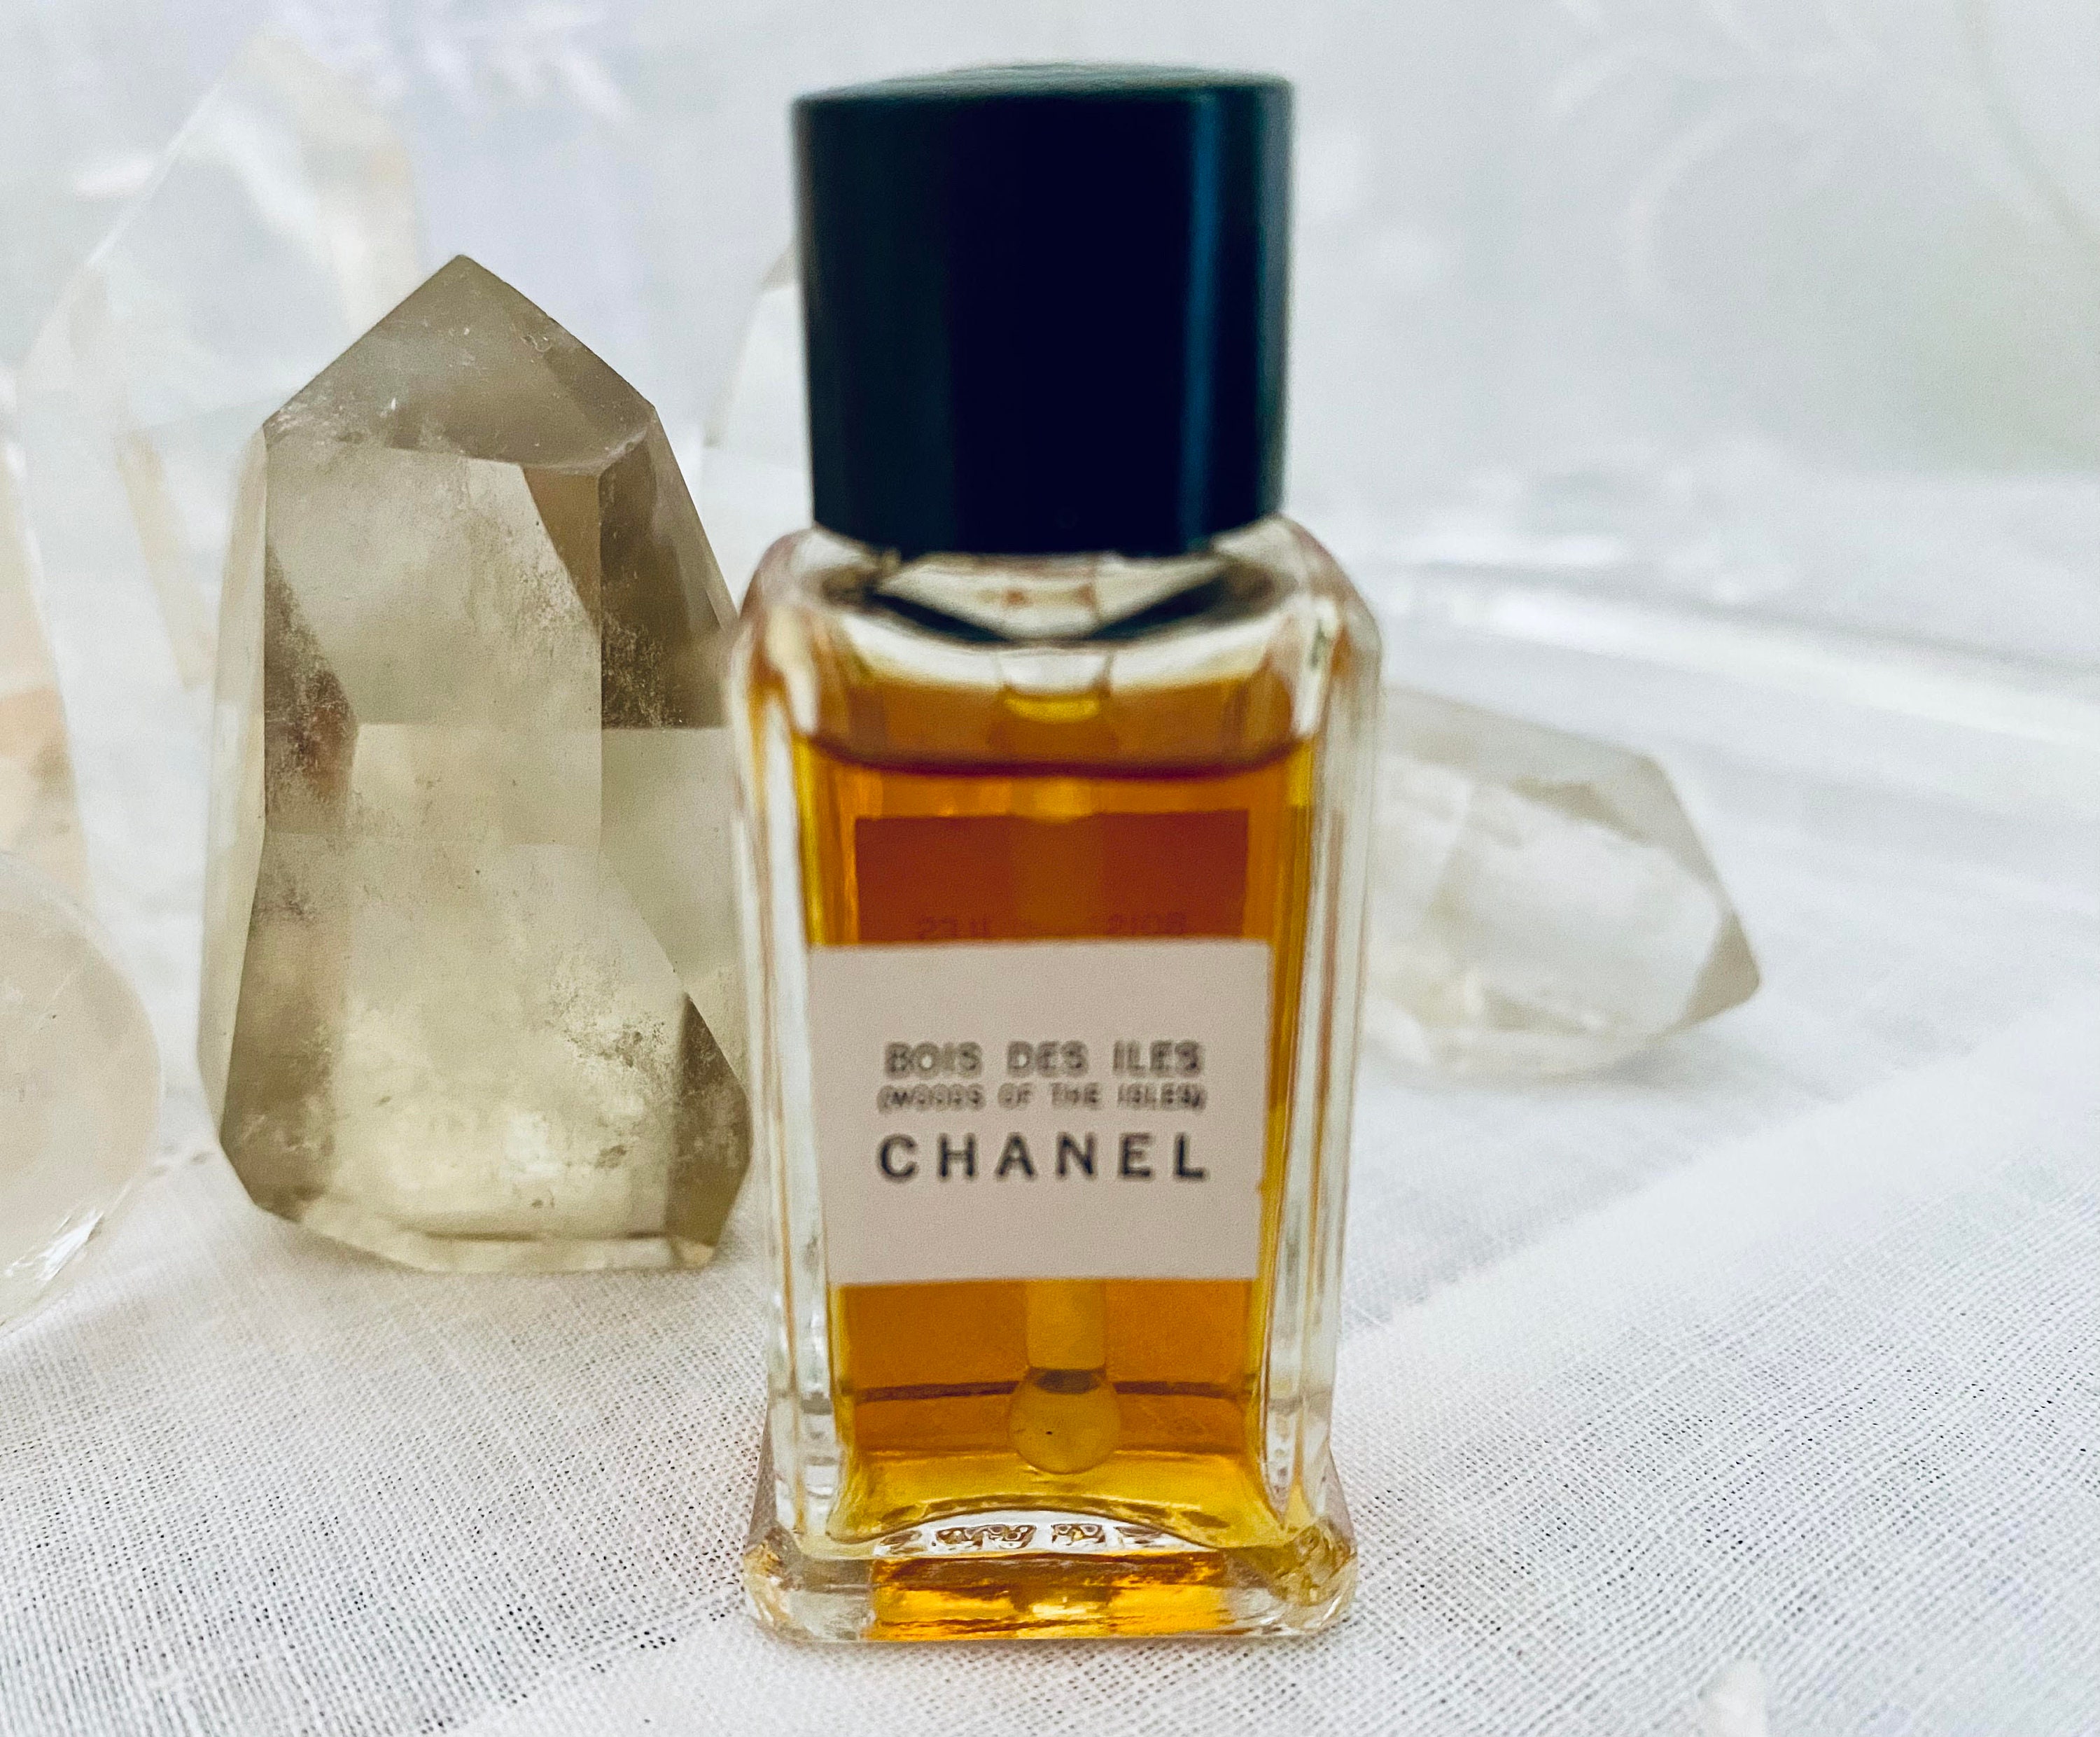 Chanel Bois Des Iles 'woods of the Isles' 7.5 Ml. -  Sweden